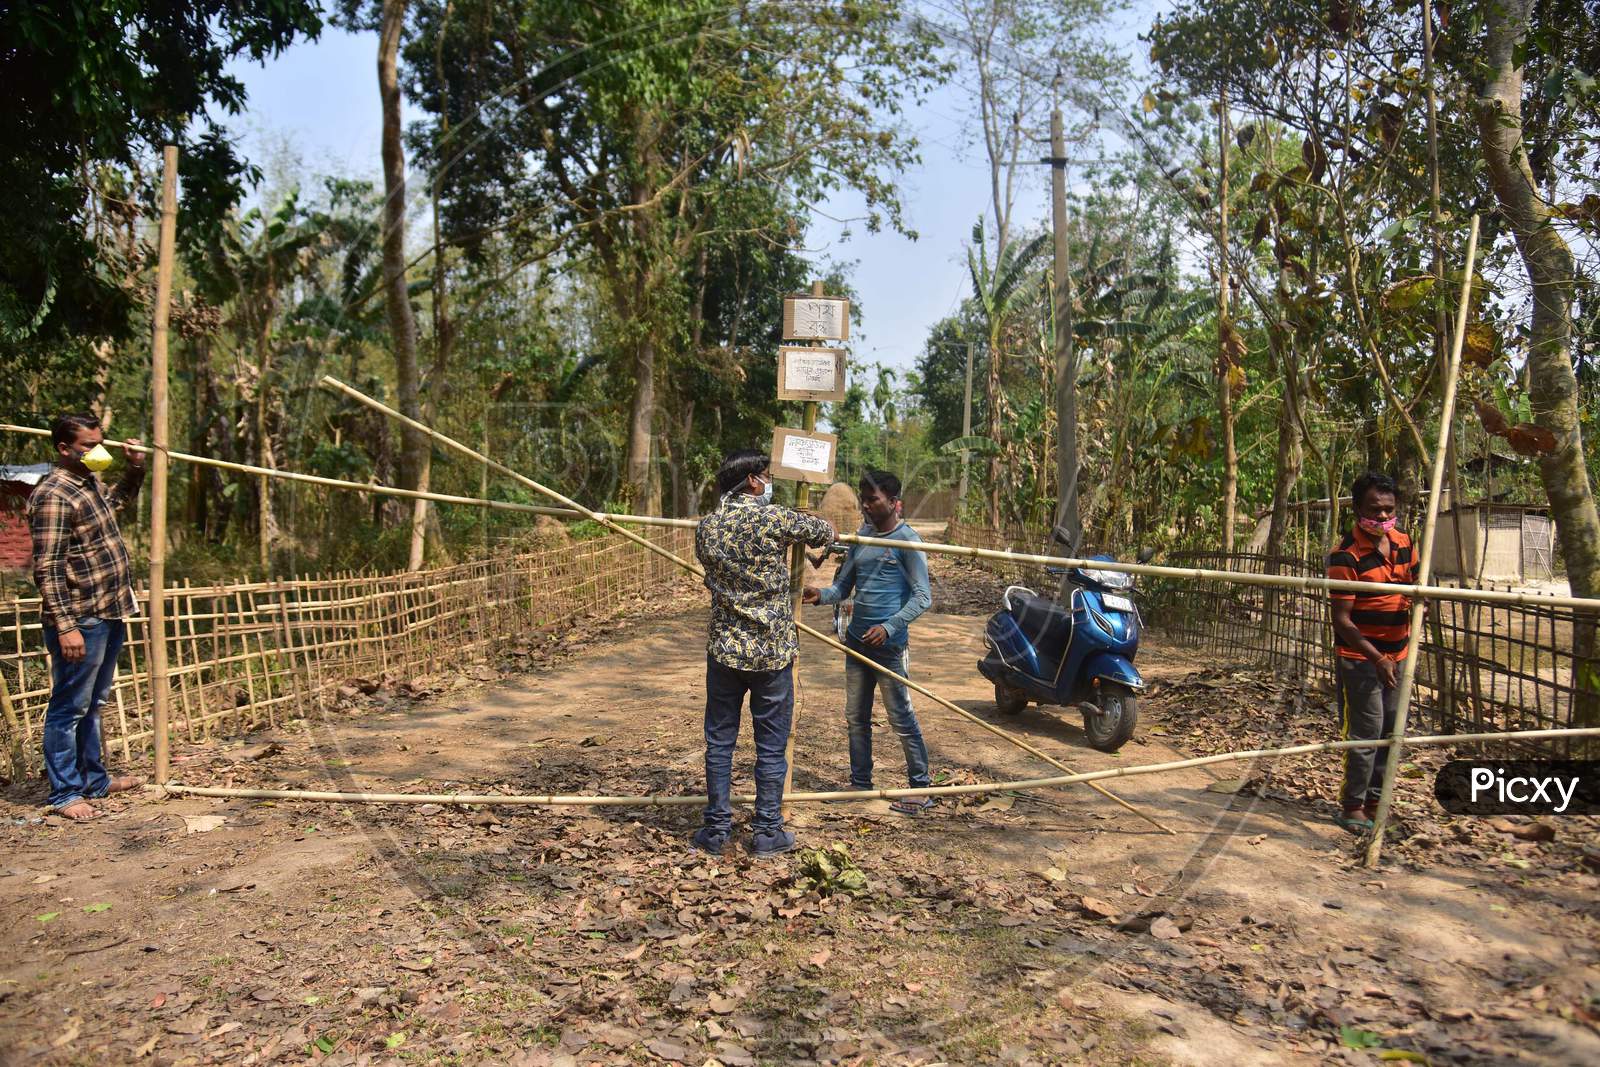 Barricade Made Of Bamboo Is Laid Across A Road By Residents During A 21-Day Nationwide Lockdown To Limit The Spreading Of Coronavirus Disease (Covid-19), At A Village In Nagaon District Of Assam